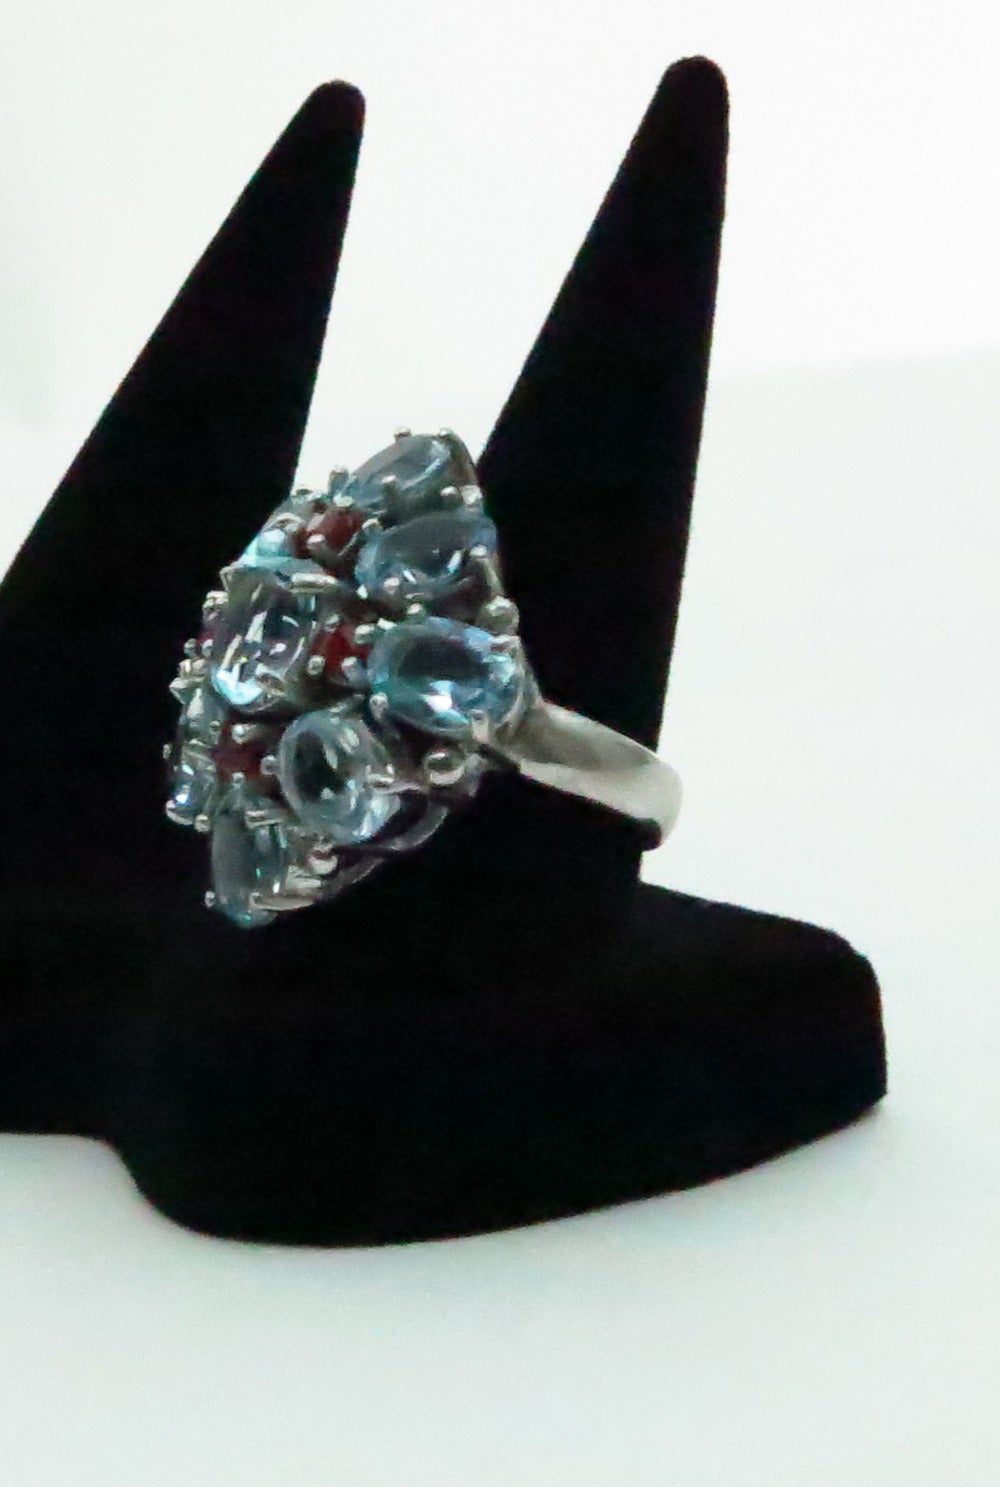 Faux aquamarine & ruby ring set in sterling silver…Nine oval cut faux aquamarine stones with four brilliant cut faux rubies, all stones are prong set with open backs…Marked 925…In excellent condition…

Measurements are:
1 ¼” wide
1 ¼” high